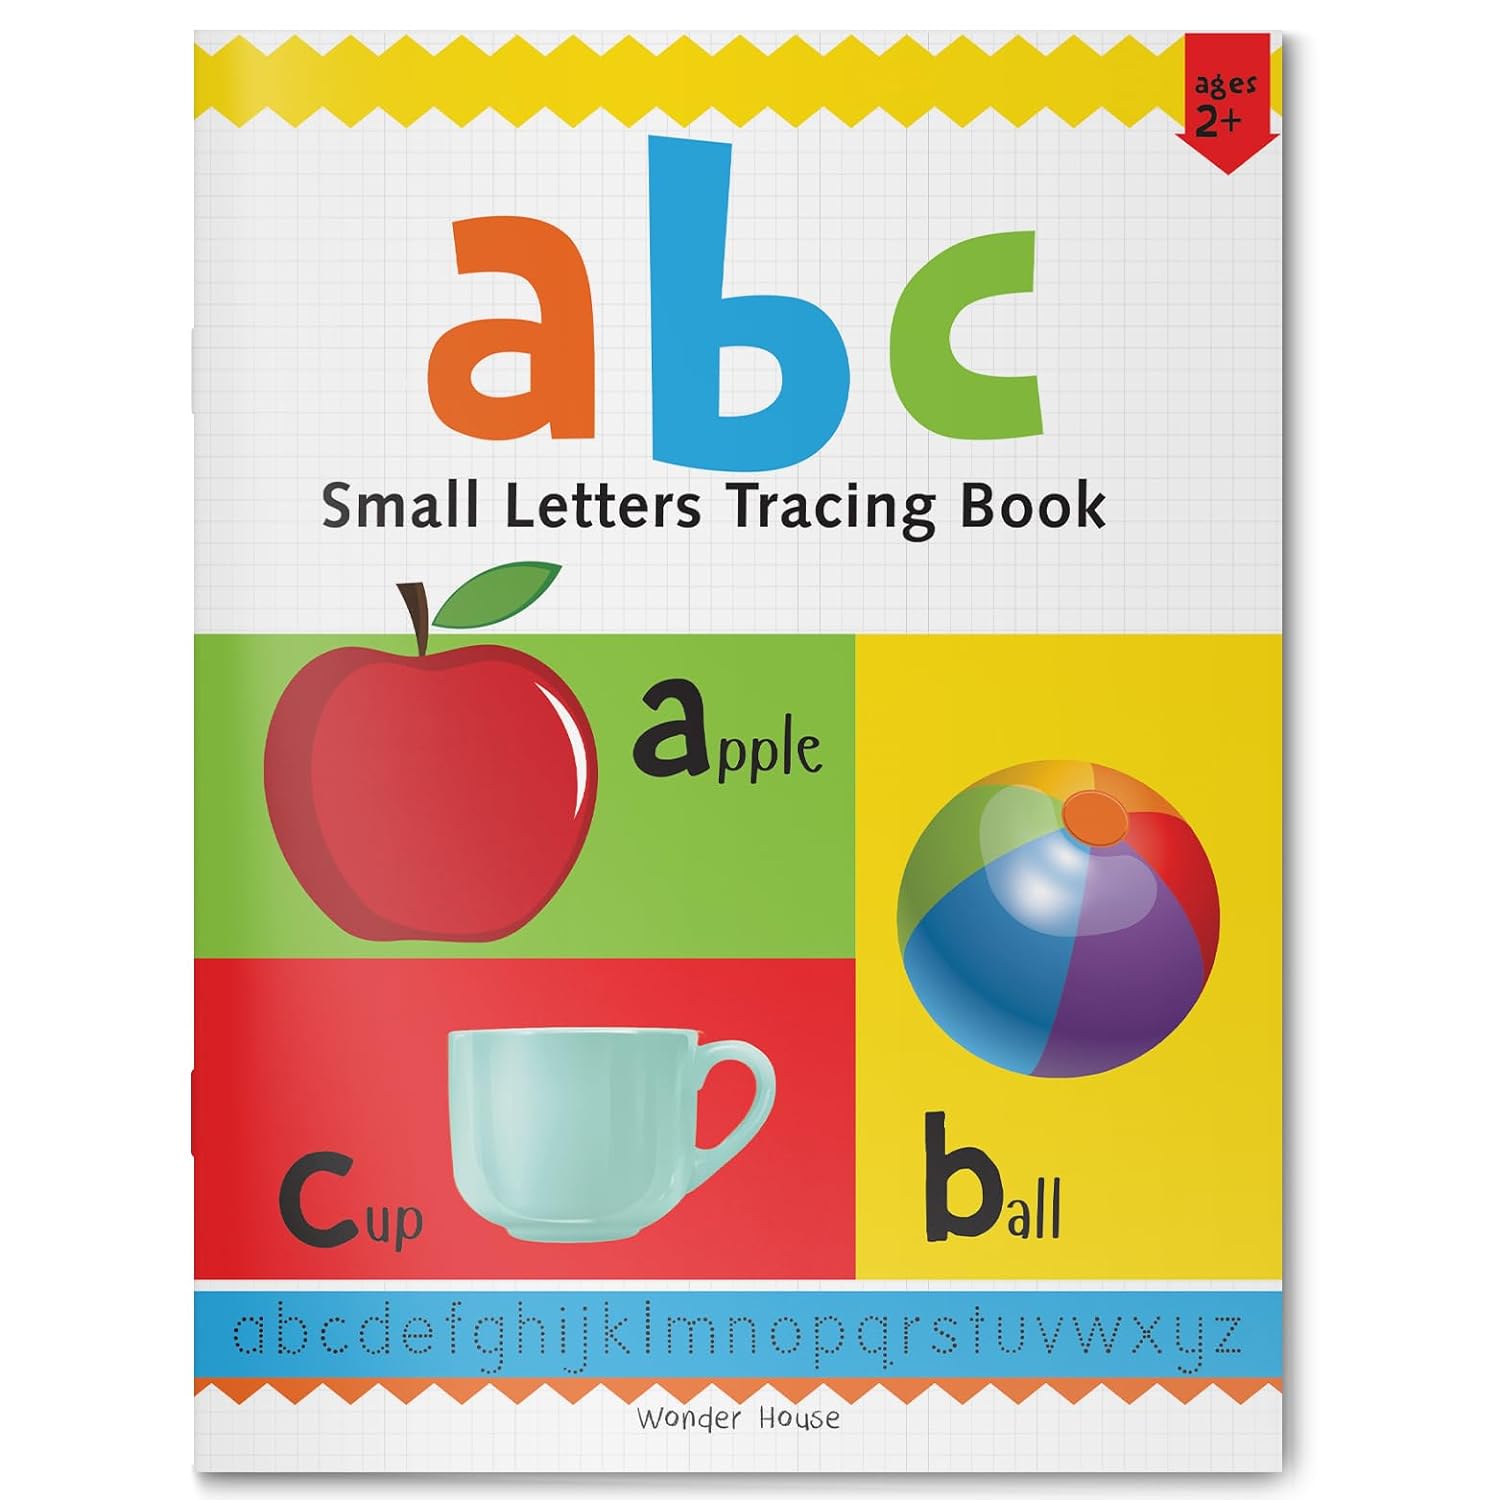 abc - Small Letters Tracing Book